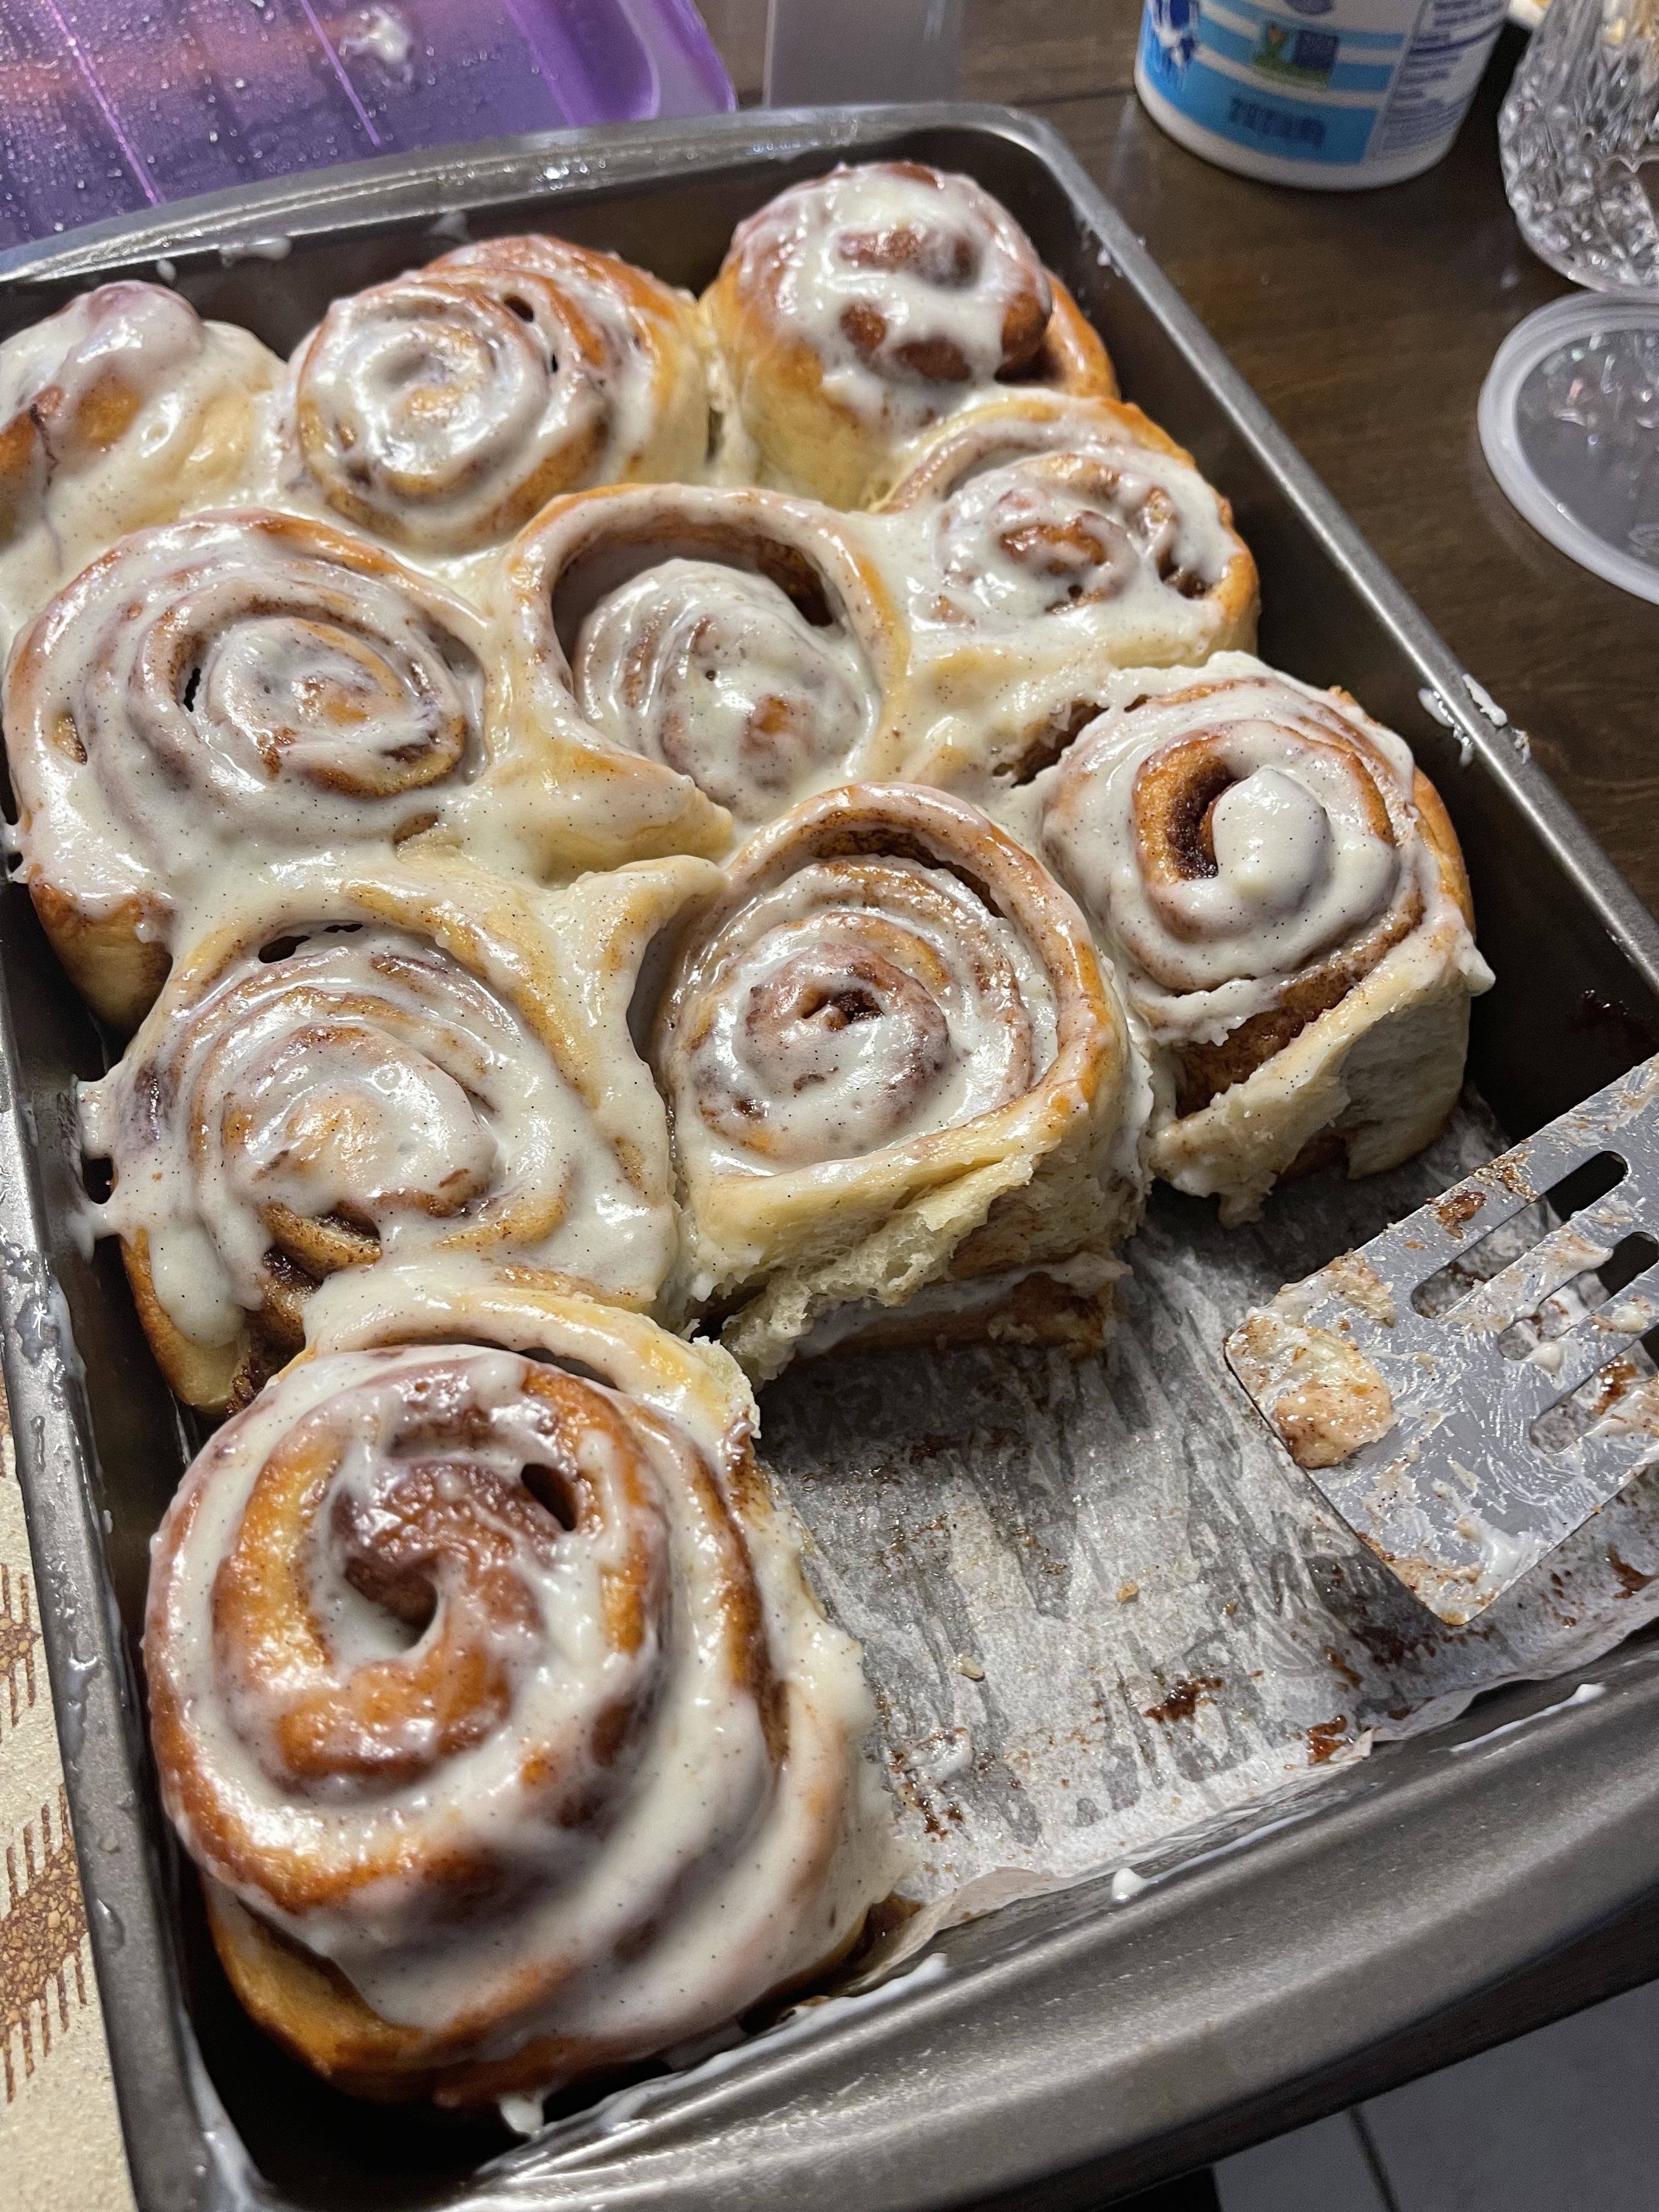 Tray of freshly baked cinnamon rolls with one partially taken out